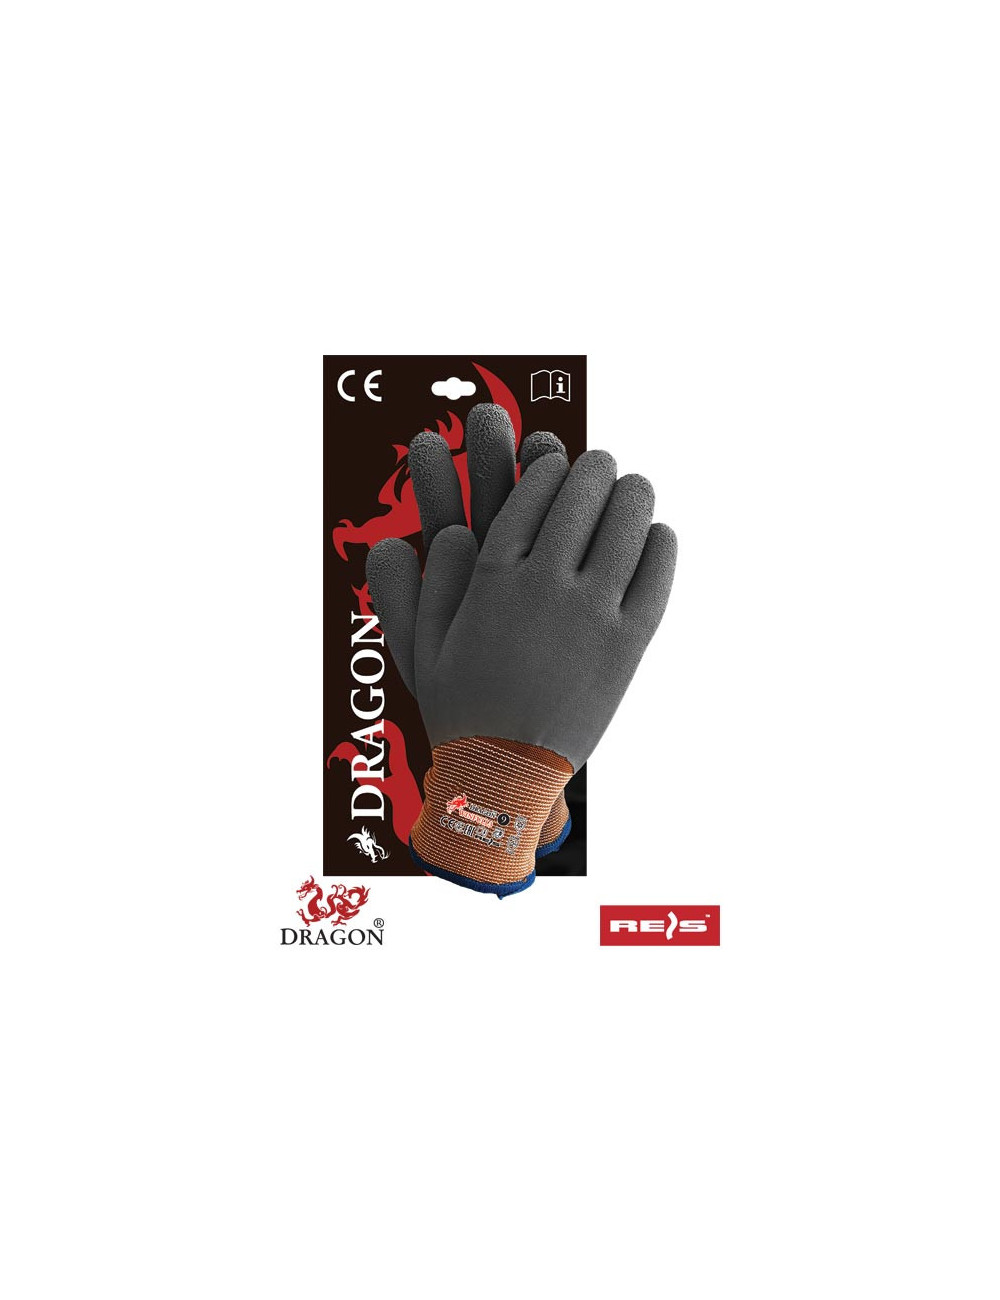 Protective gloves winfull3 brs brown-gray Reis